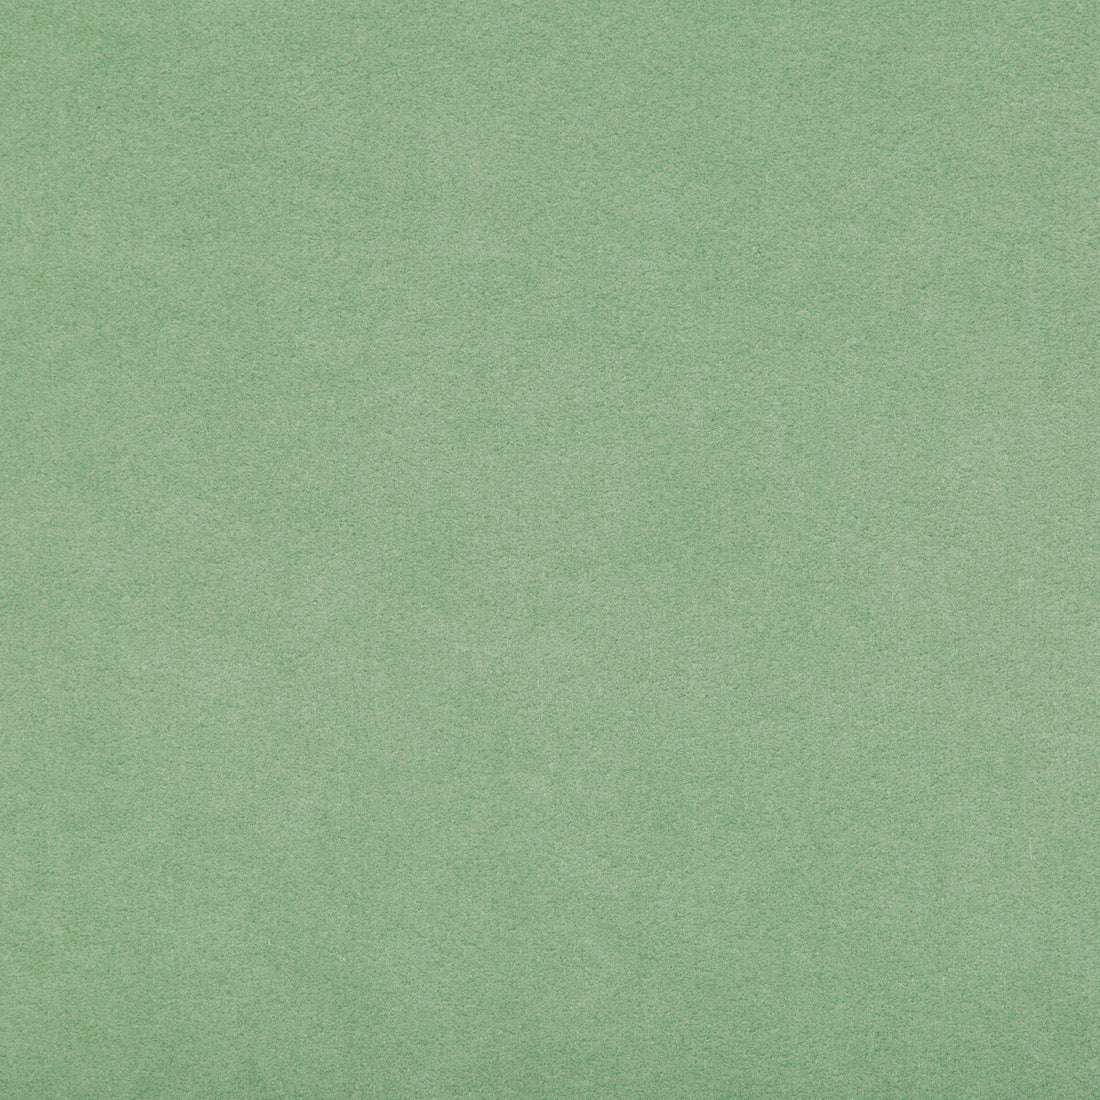 Ultrasuede Green fabric in sprig color - pattern 30787.303.0 - by Kravet Design in the Performance collection